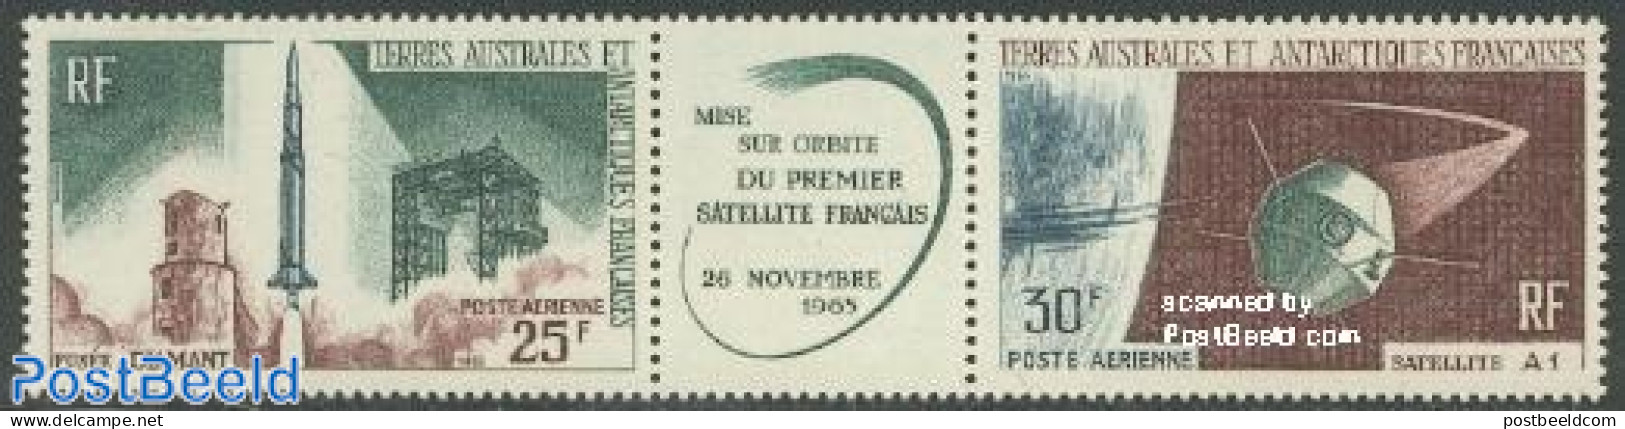 French Antarctic Territory 1966 Satellites 2v+tab [:T:], Mint NH, Transport - Various - Space Exploration - Joint Issues - Unused Stamps